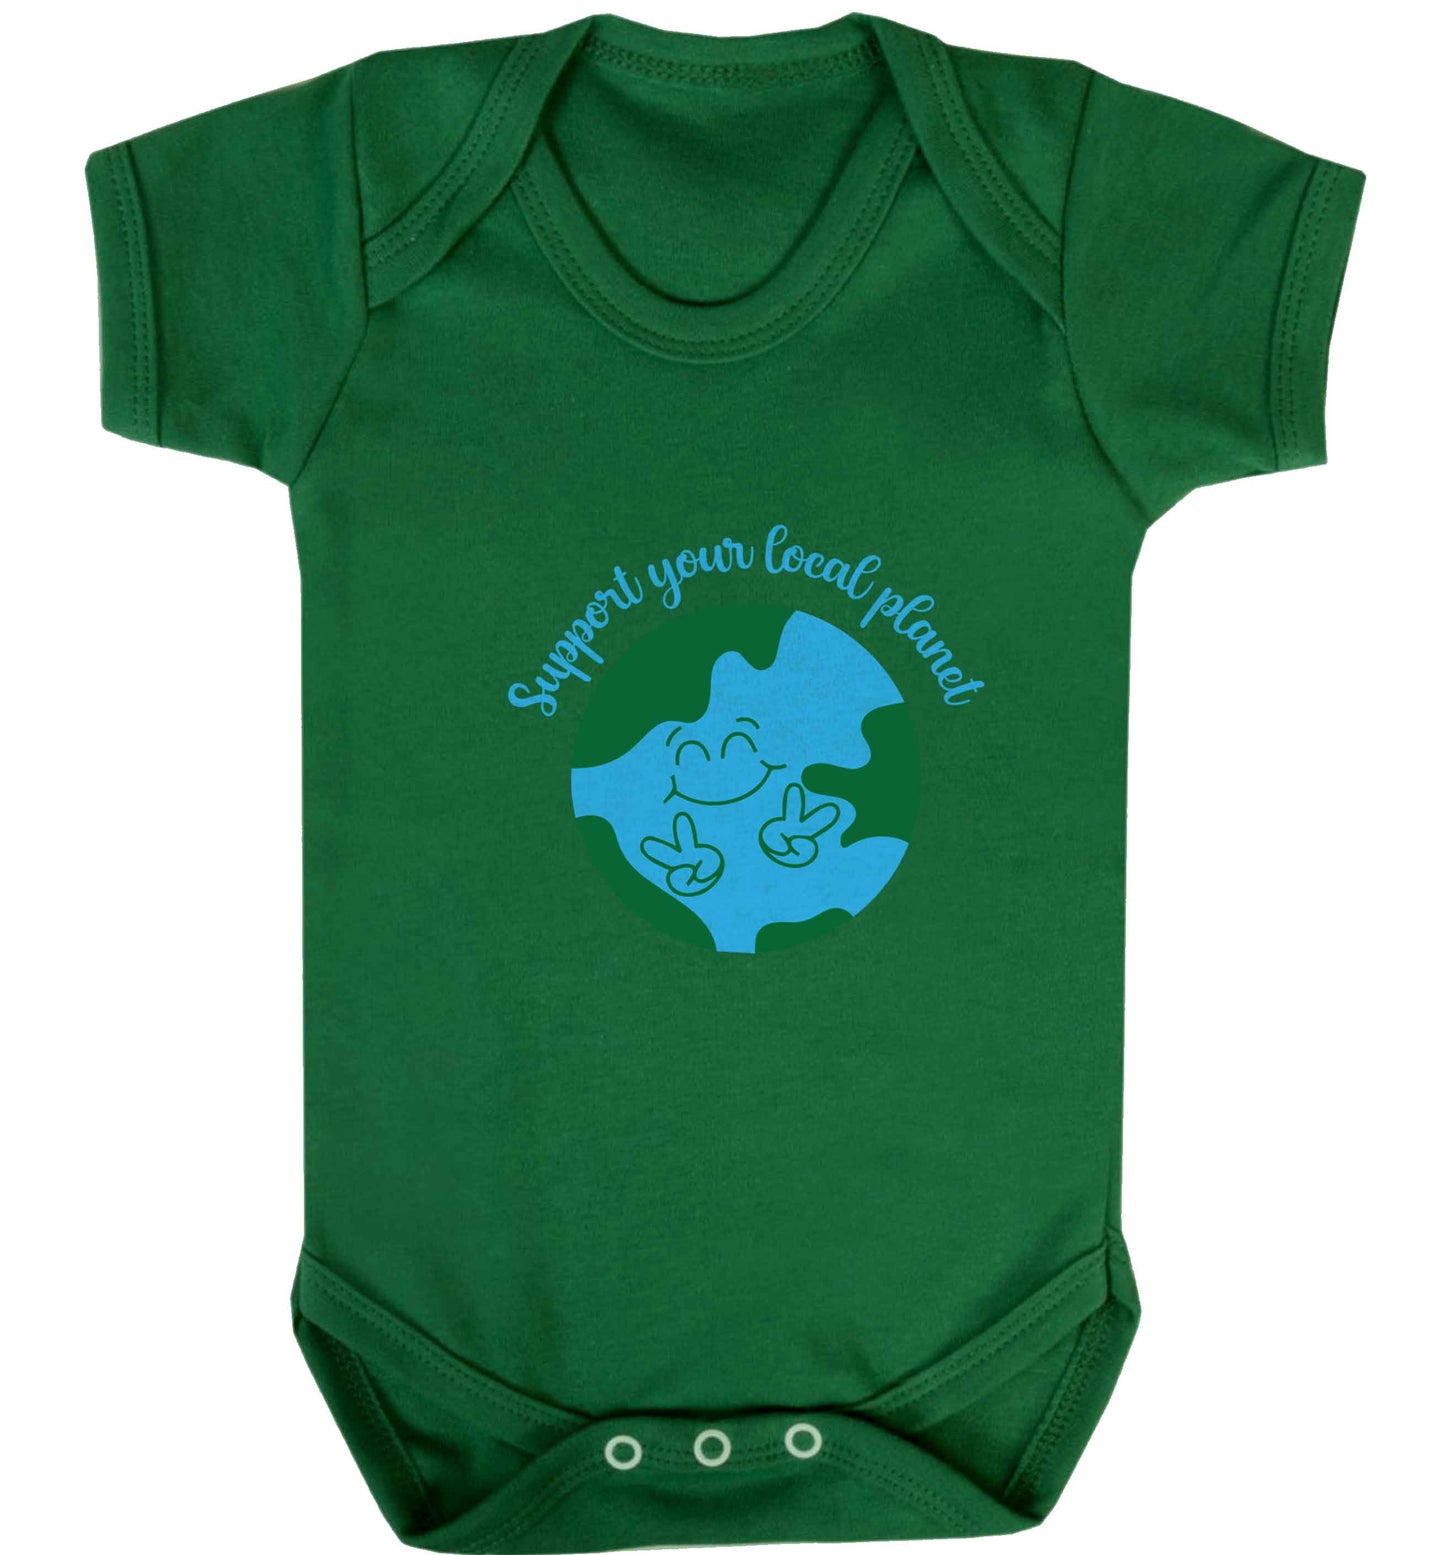 Support your local planet baby vest green 18-24 months